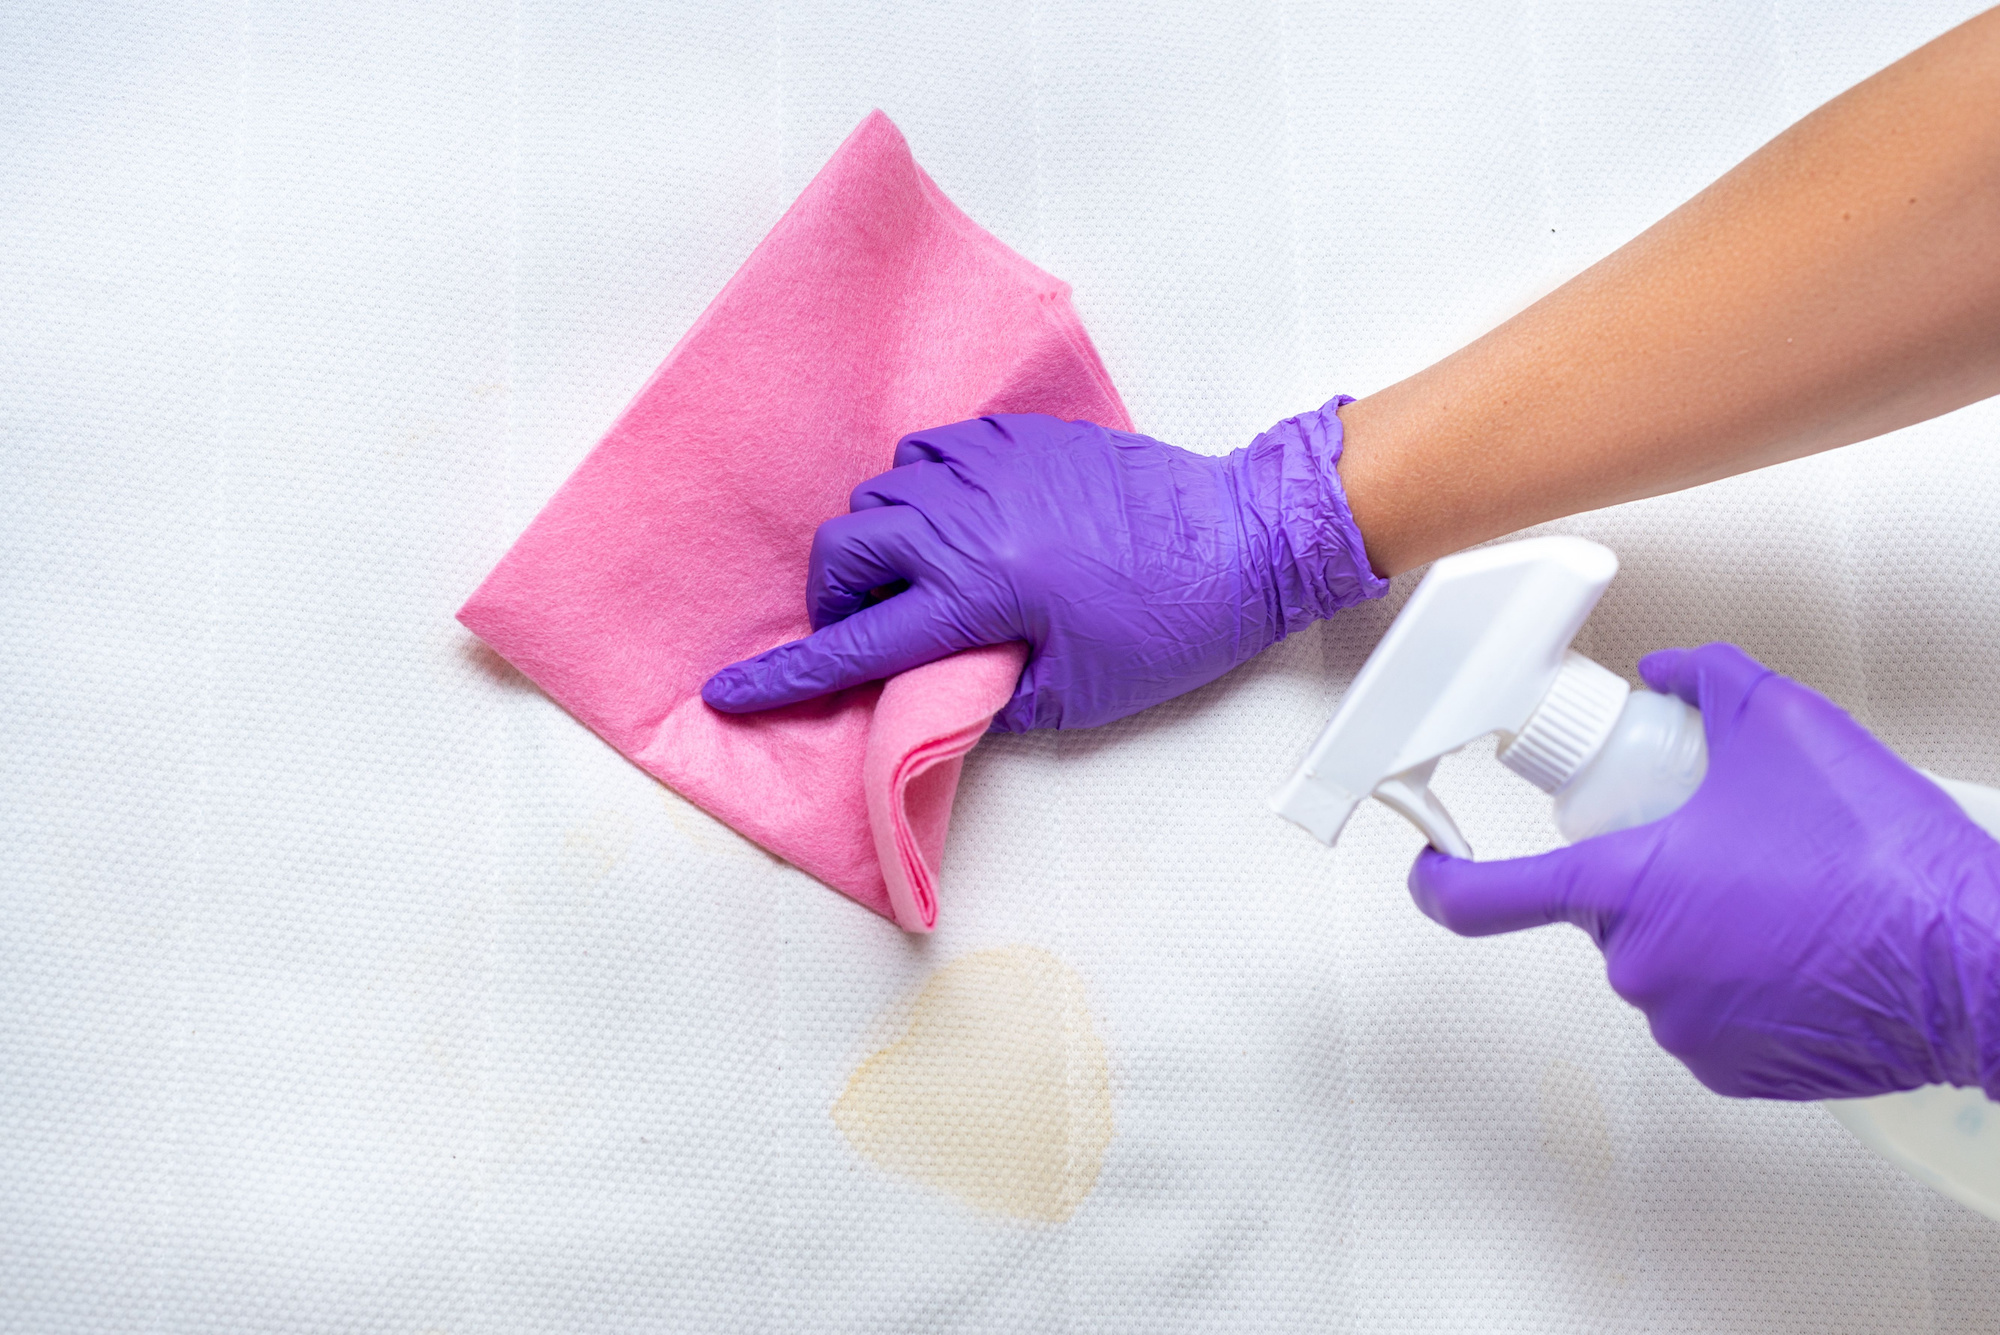 Steps For Removing Urine Stains From A Purple Mattress